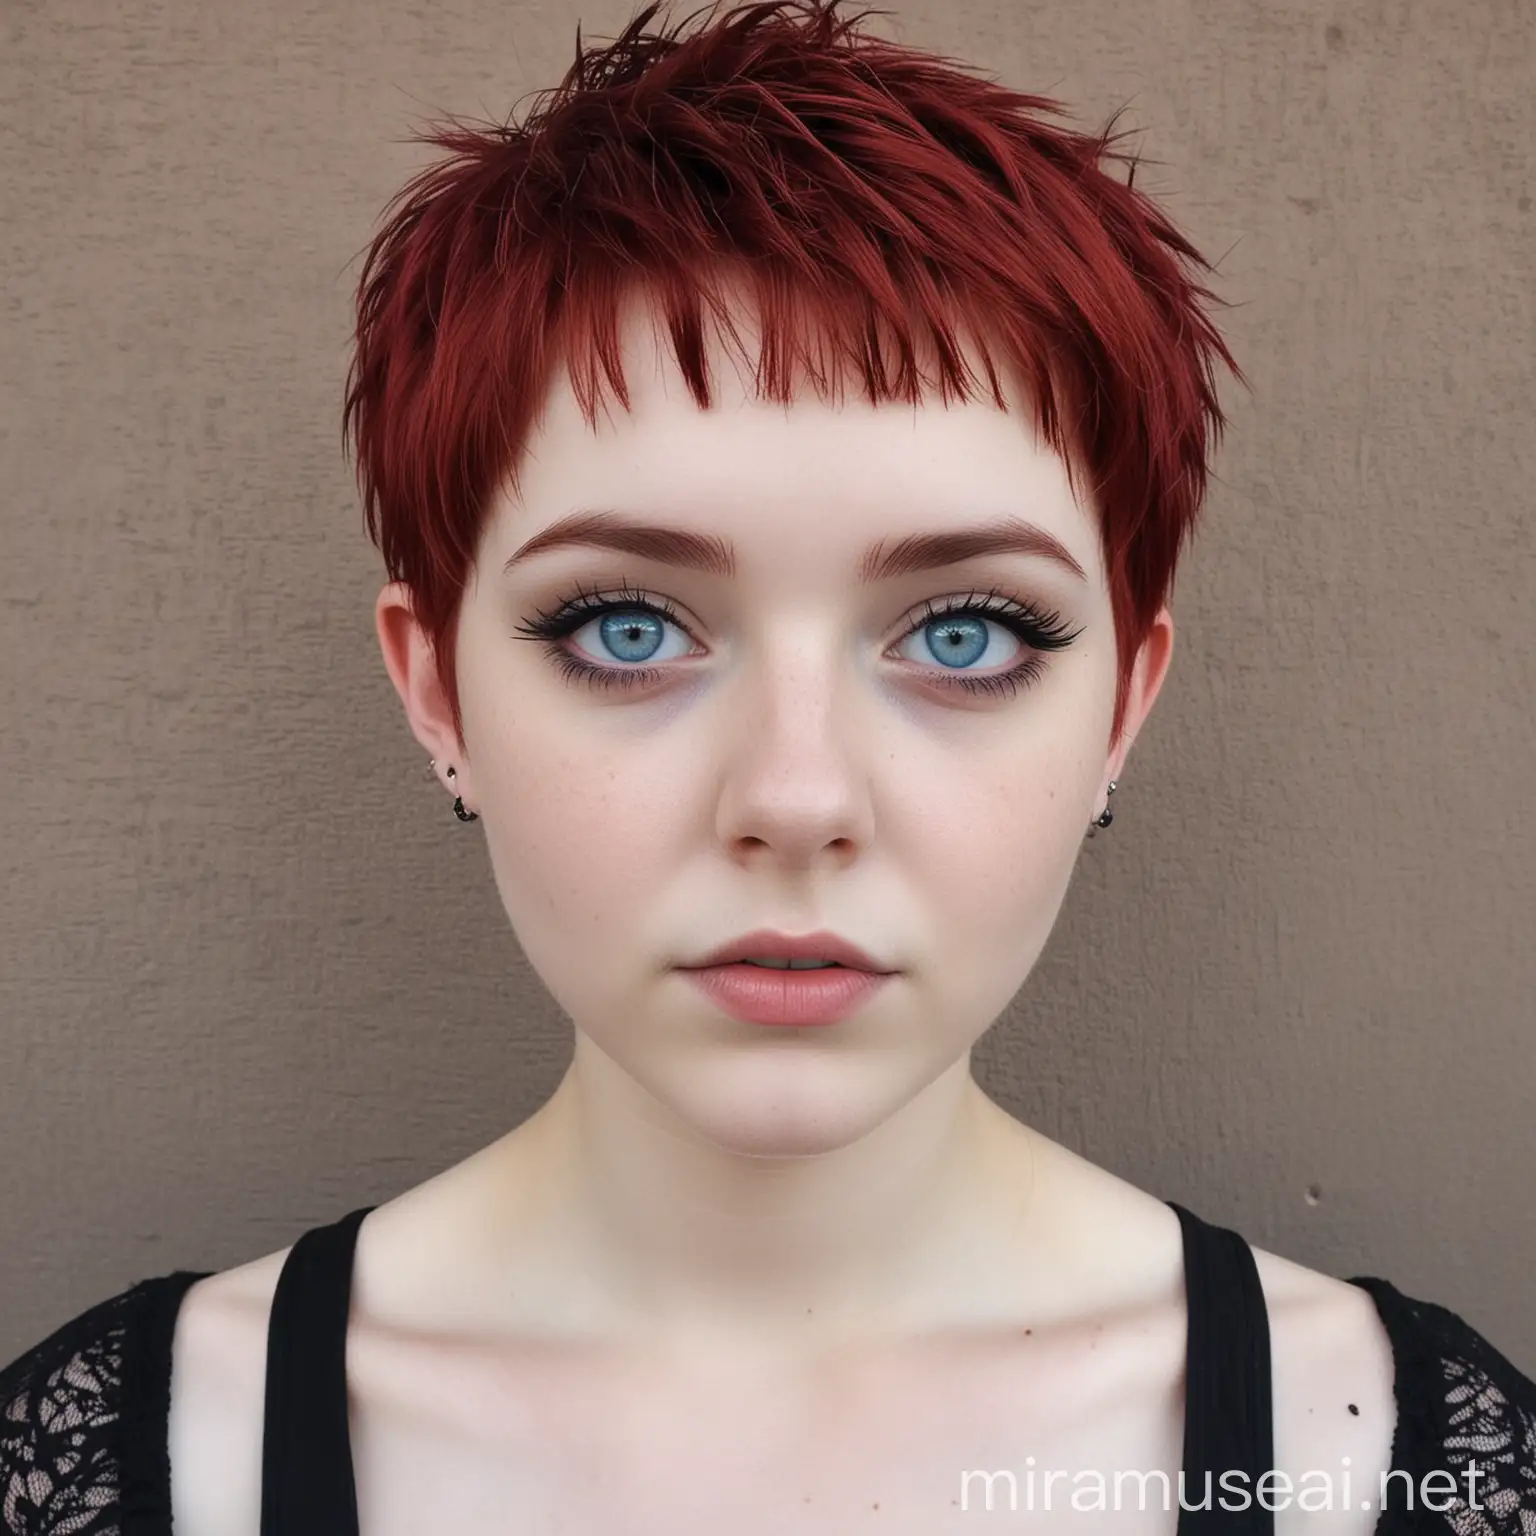 Goth Teen Girl with Pixie Cut and Red Hair